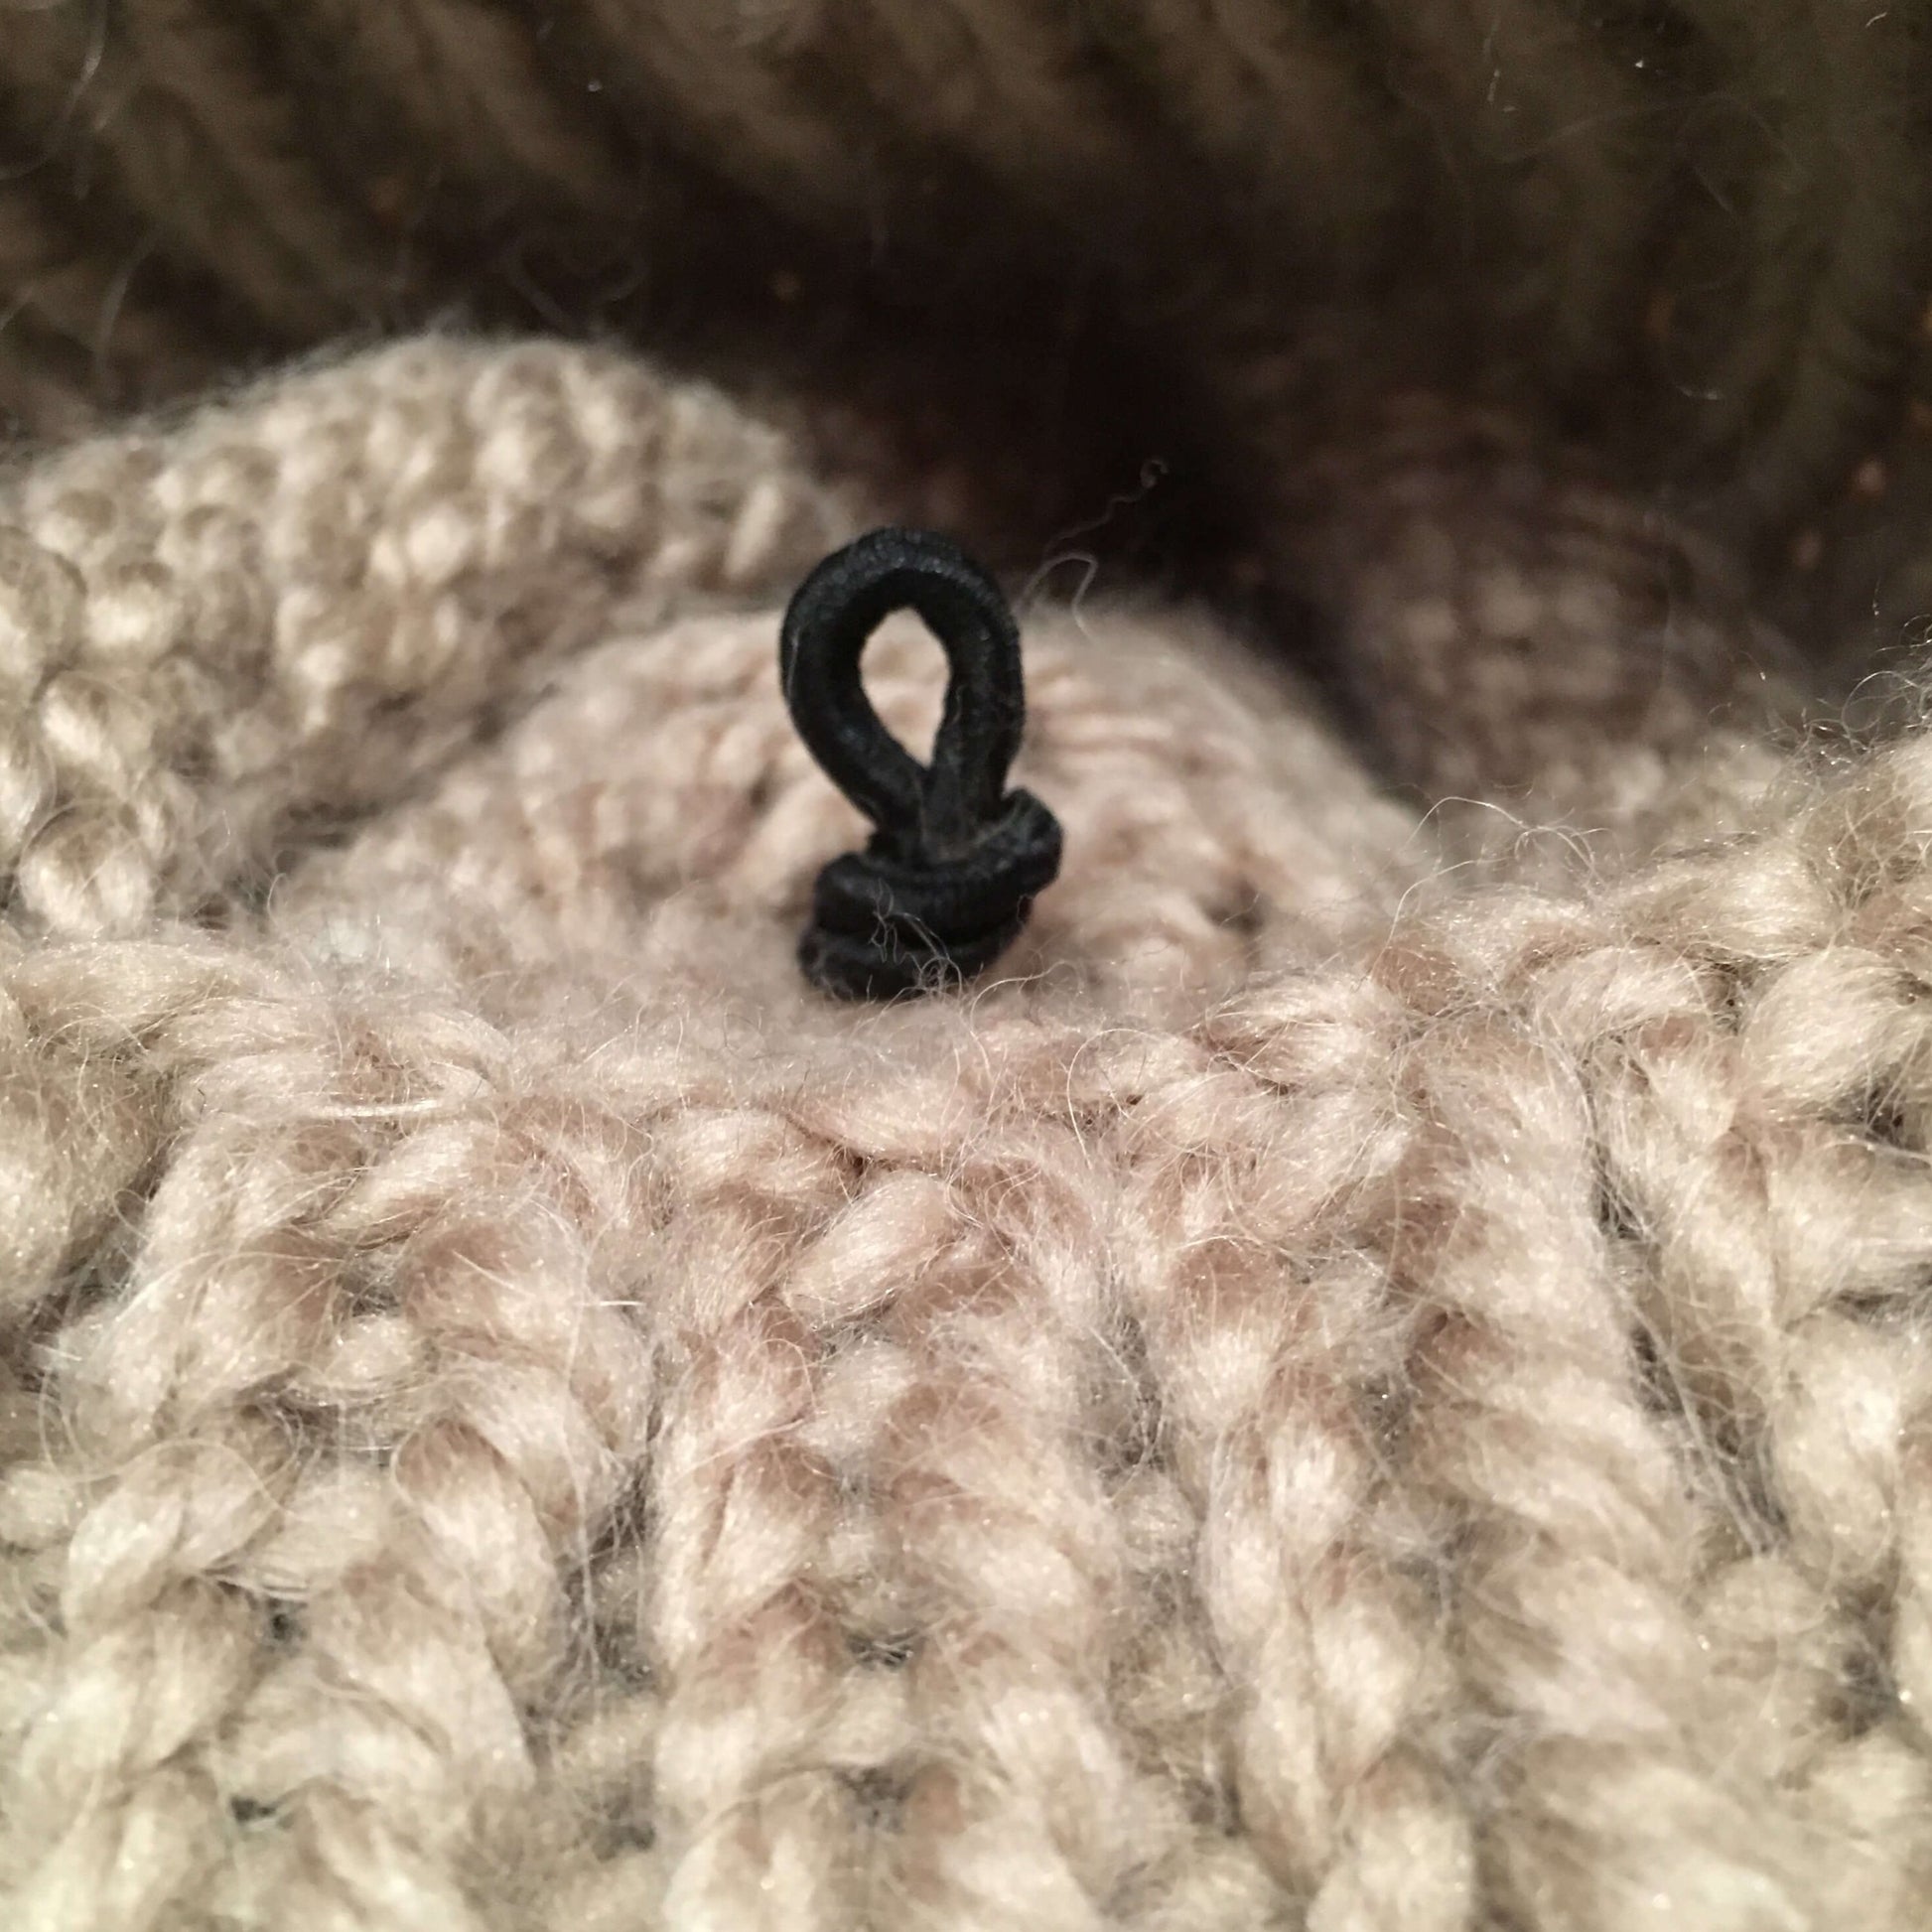 elastic loop attachment tied in knot inside beige knit hat, secured in place